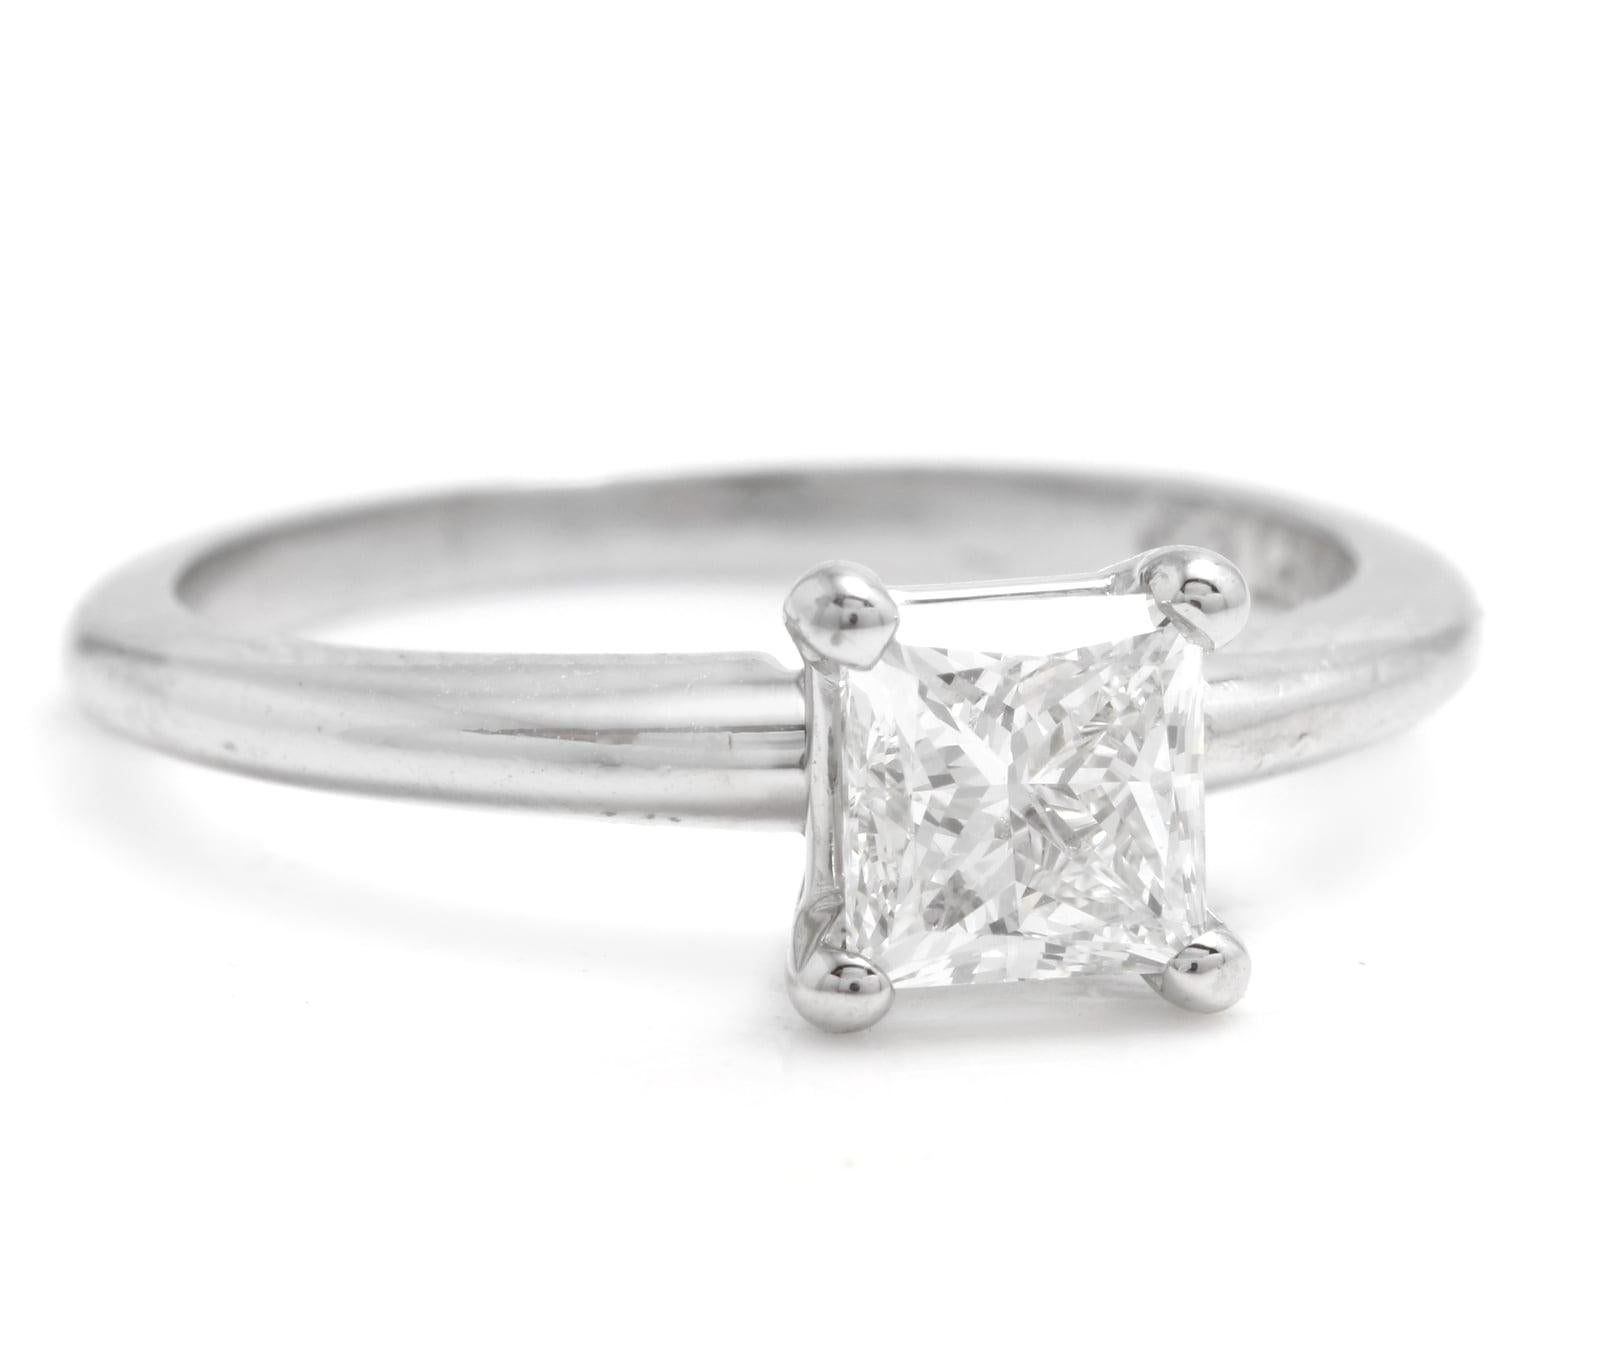 GIA Certified 0.70 Carats Diamond 950 Platinum Engagement Ring

Suggested Replacement Value: Approx. $4,500.00

Stamped: 950 Platinum

Total Princess Cut Diamond Weight is: 0.70 Carats (color H / Clarity VS2)

Diamond Treatment: Untreated

Ring